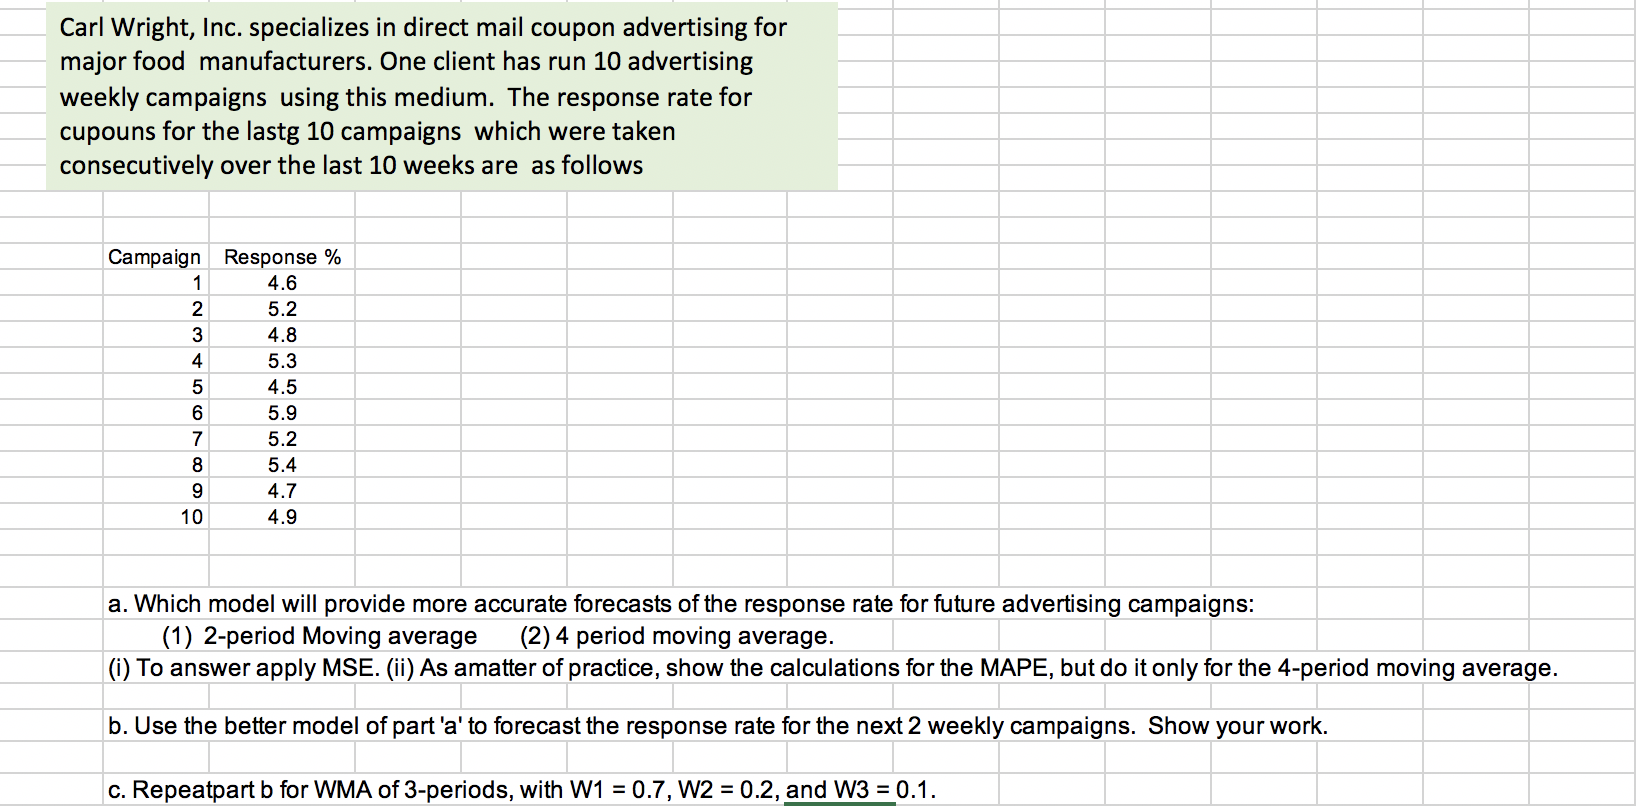 Carl Wright, Inc. specializes in direct mail coupon advertising for
major food manufacturers. One client has run 10 advertising
weekly campaigns using this medium. The response rate for
cupouns for the lastg 10 campaigns which were taken
consecutively over the last 10 weeks are as follows
Campaign Response %
4.6
5.2
3
4.8
4
5.3
4.5
5.9
7
5.2
5.4
4.7
10
4.9
a. Which model will provide more accurate forecasts of the response rate for future advertising campaigns:
(1) 2-period Moving average
|(i) To answer apply MSE. (ii) As amatter of practice, show the calculations for the MAPE, but do it only for the 4-period moving average.
(2) 4 period moving average.
b. Use the better model of part 'a' to forecast the response rate for the next 2 weekly campaigns. Show your work.
c. Repeatpart b for WMA of 3-periods, with W1 = 0.7, W2 = 0.2, and W3 = 0.1.
